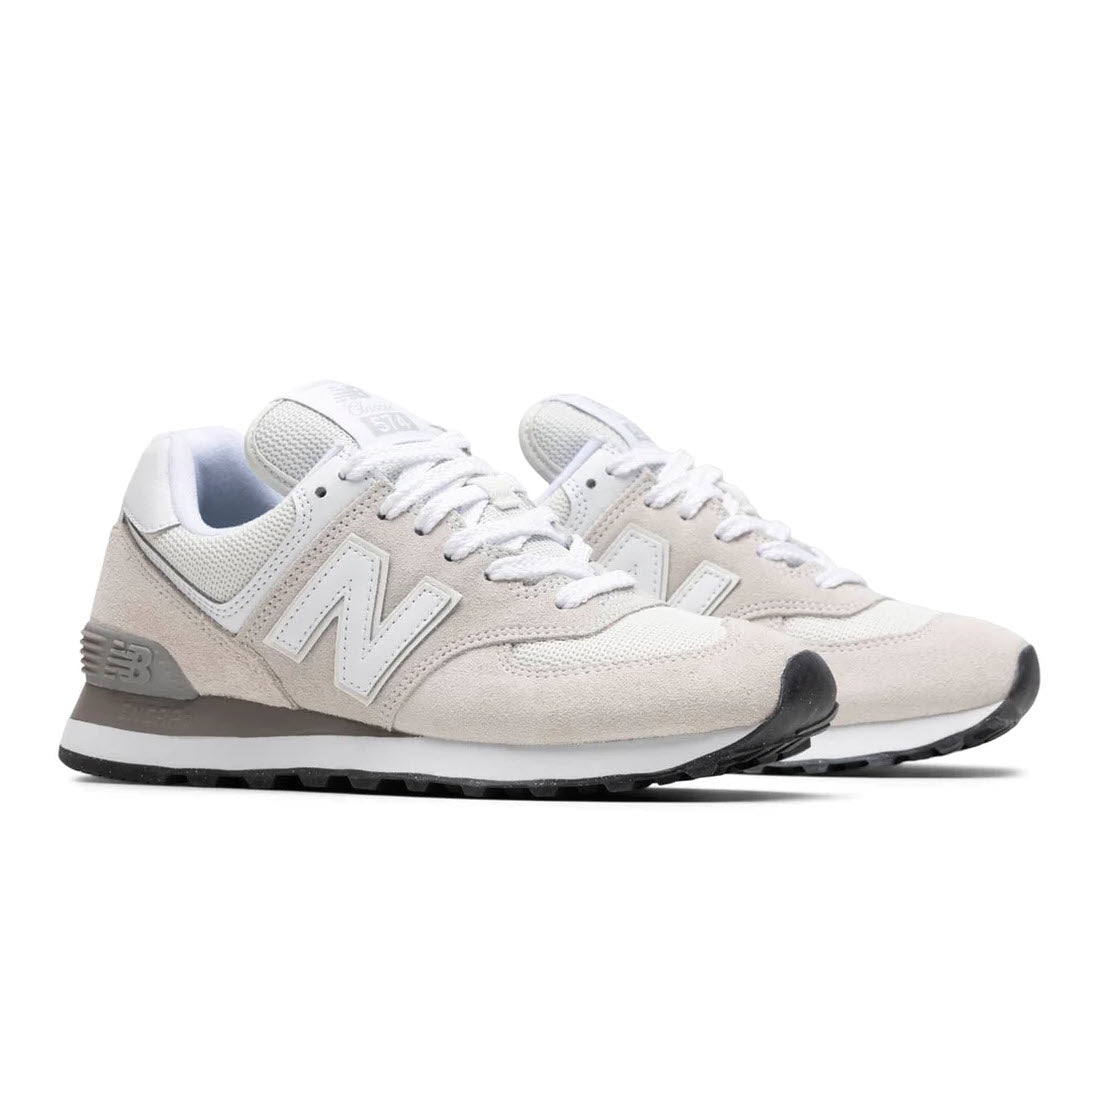 A pair of new New Balance 574 Nimbus Cloud sneakers in beige with white &quot;n&quot; logo, resting on a plain white background.